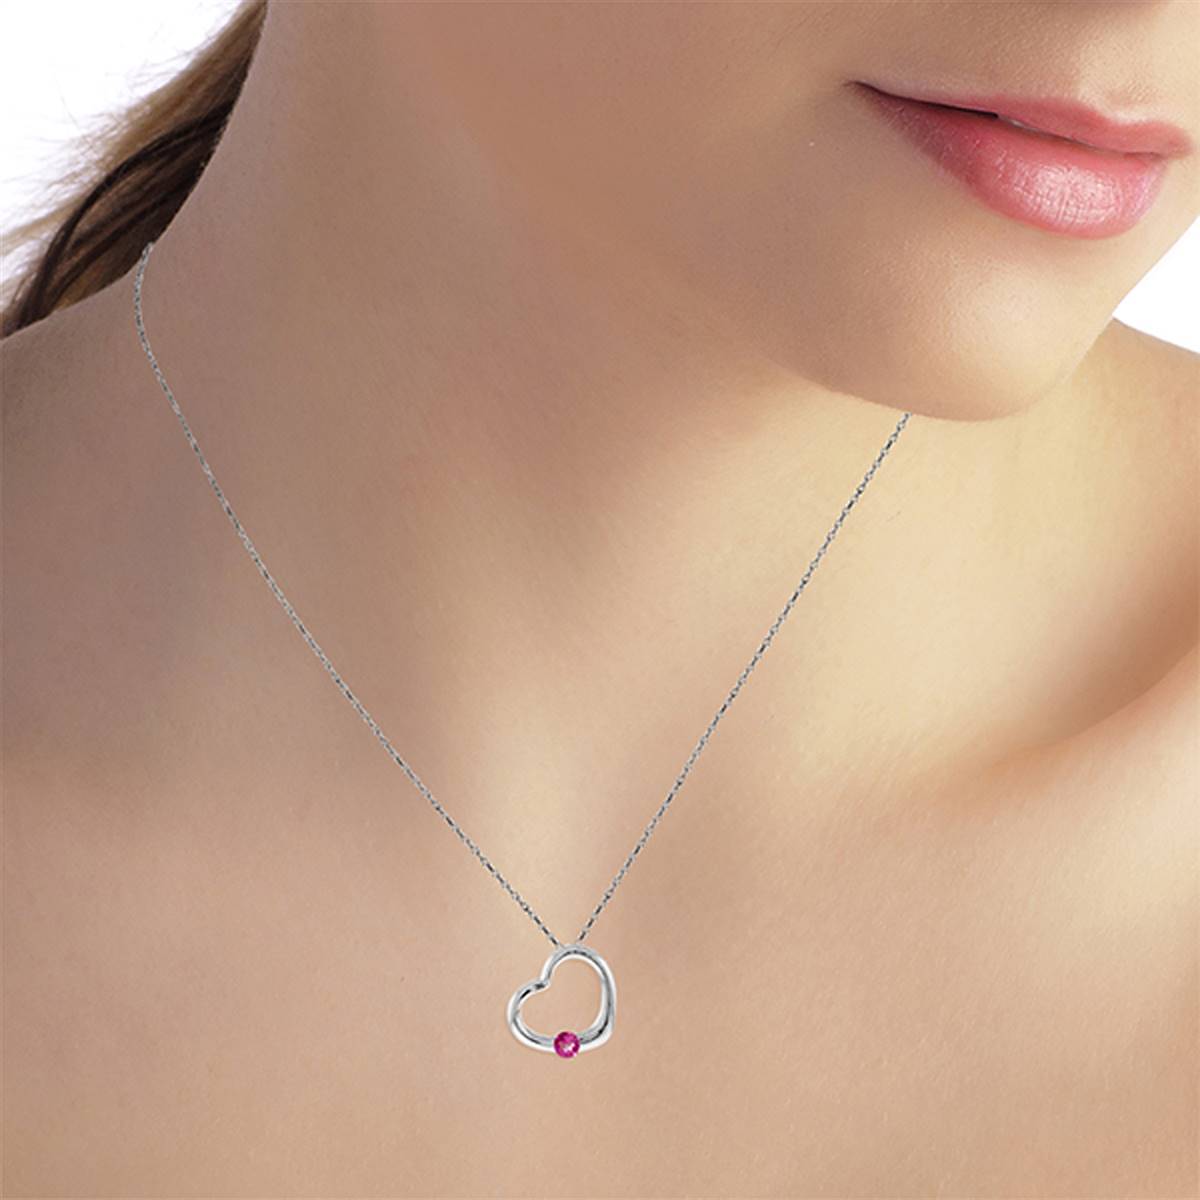 14K Solid White Gold Heart Necklace w/ Natural Pink Topaz